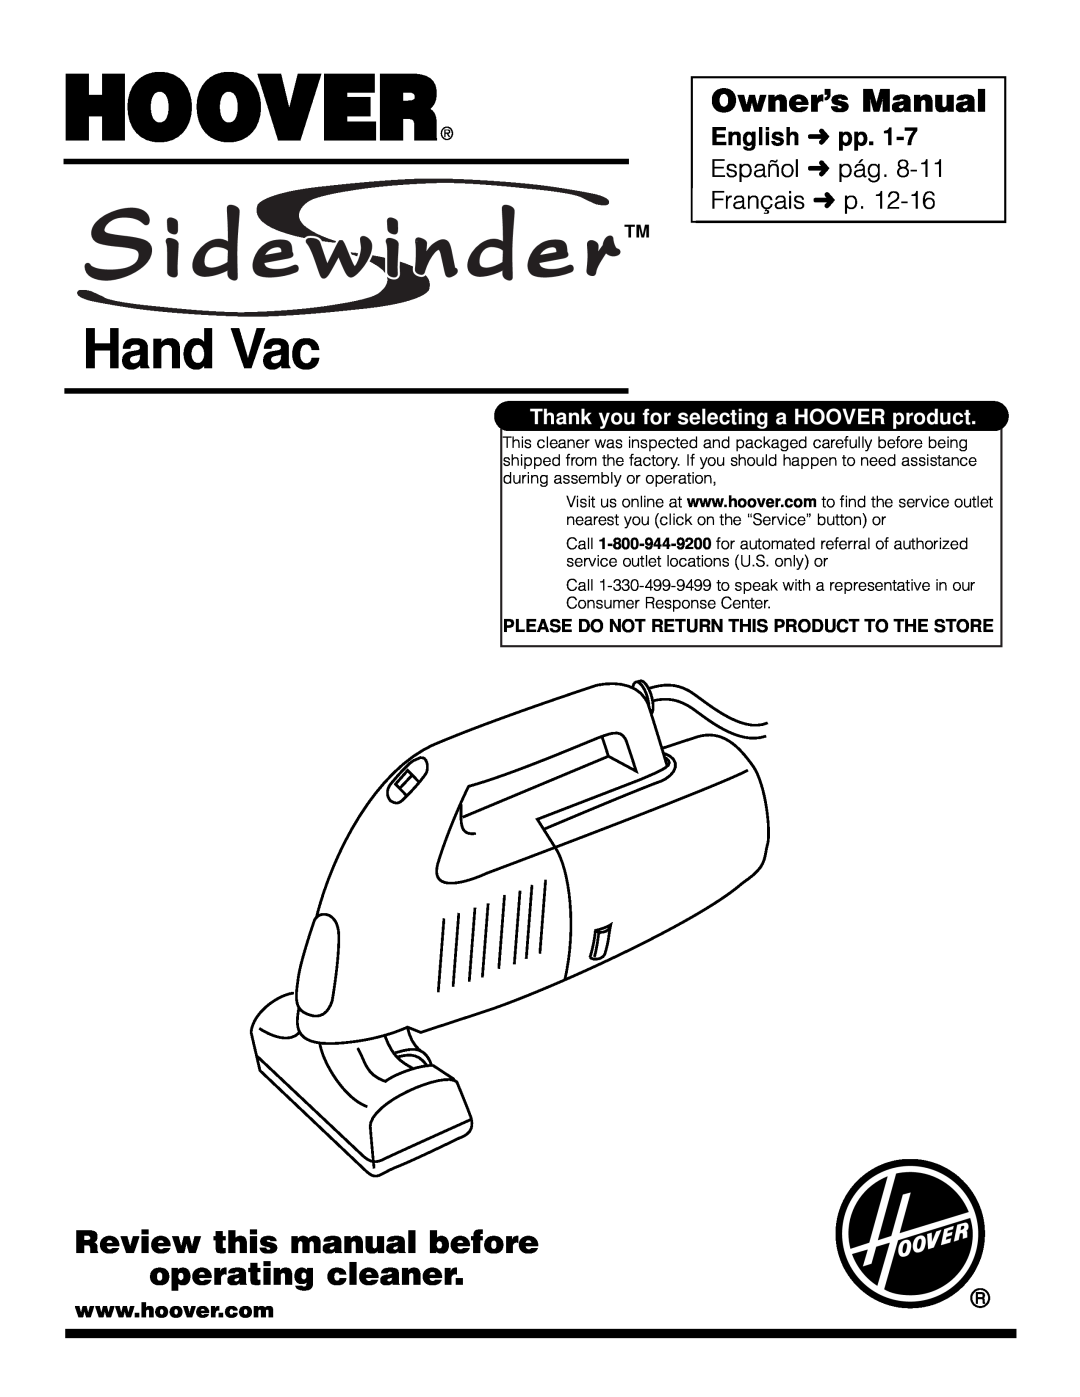 Hoover Sidewinder owner manual Owner’s Manual, Review this manual before operating cleaner, English pp, Hand Vac 